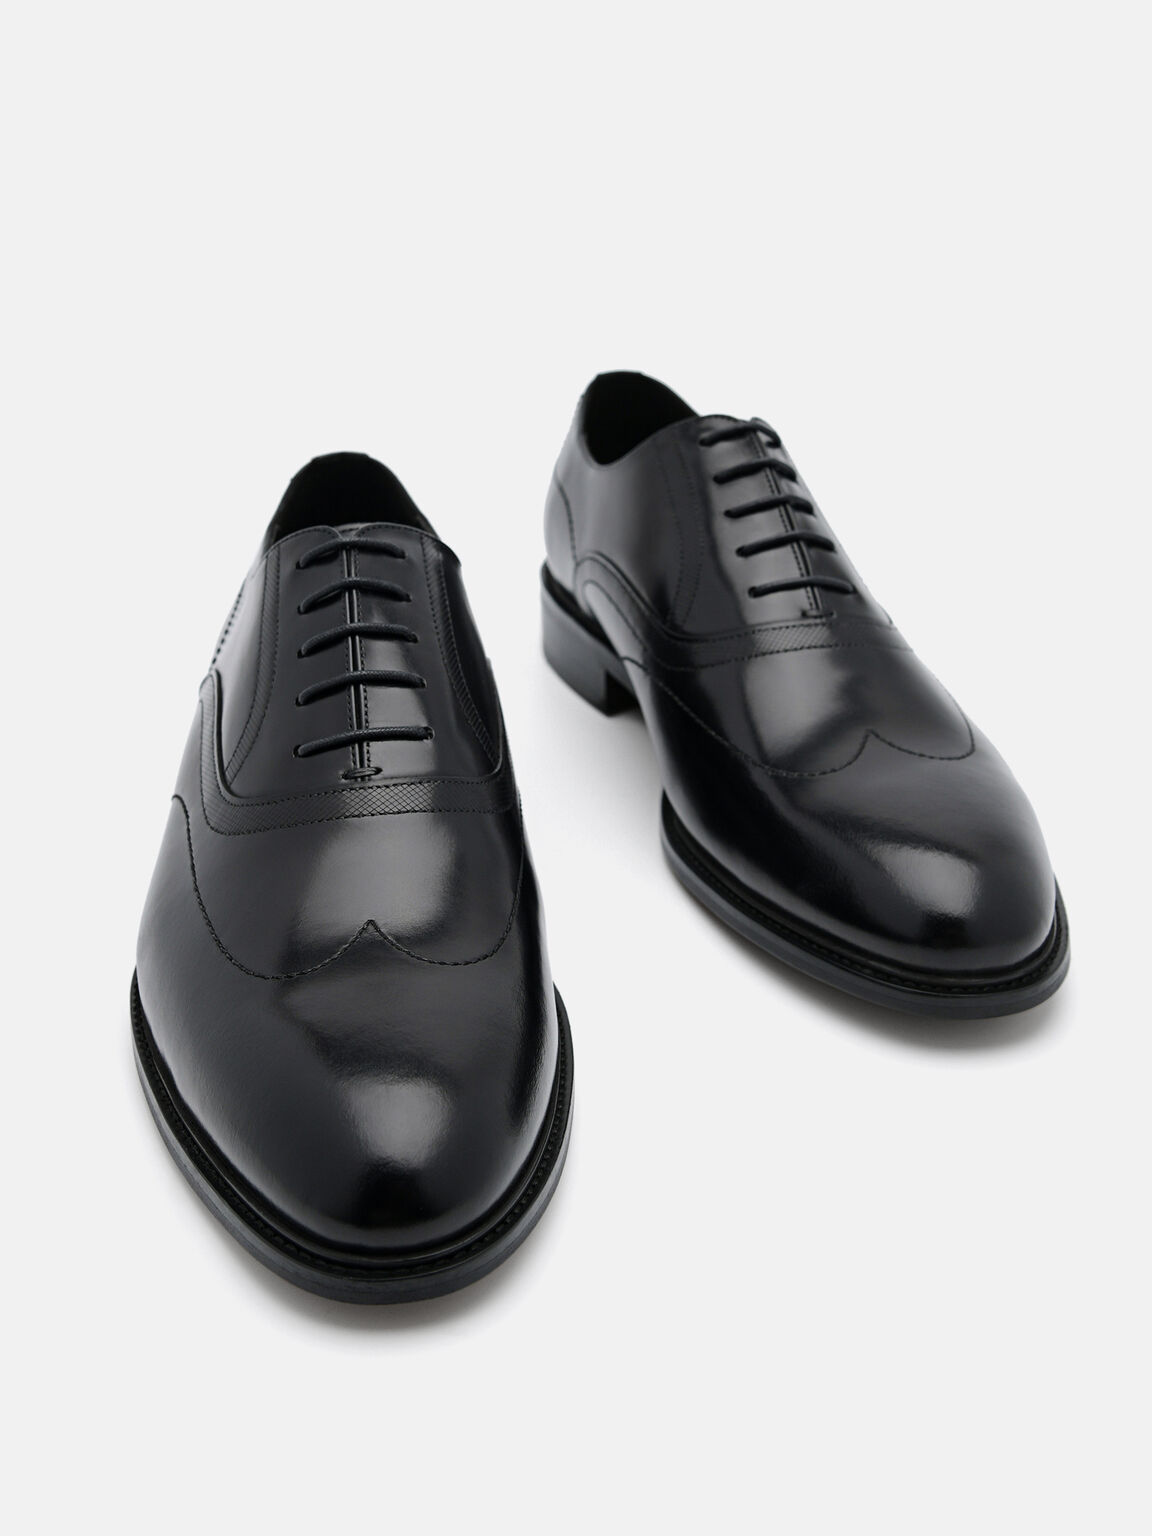 Leather Wingtip Oxford Shoes, Black